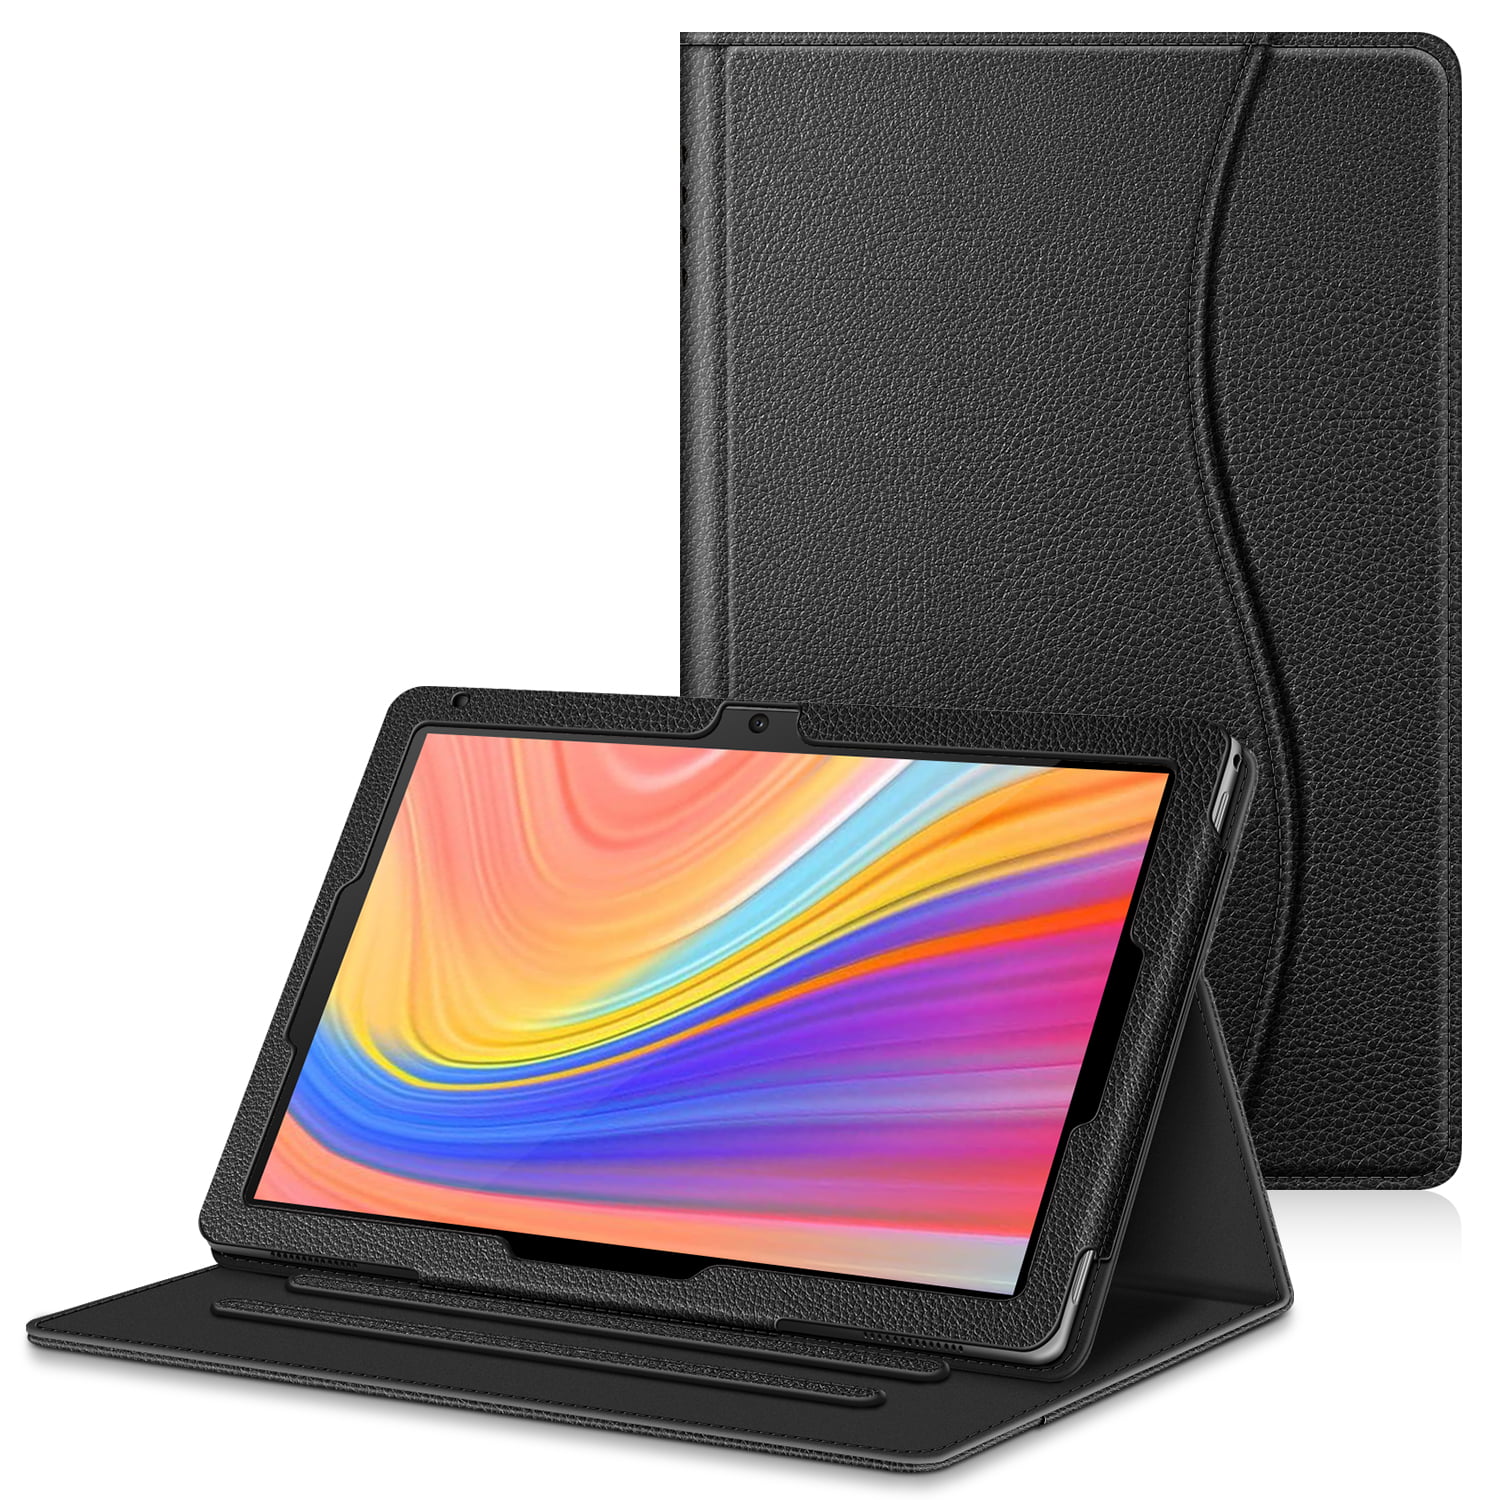 Tablet Case for MatrixPad S10 10 inch - Fintie Multiple Angle Viewing Folio  Case Cover with Pocket, Pencil Holder for VANKYO 10